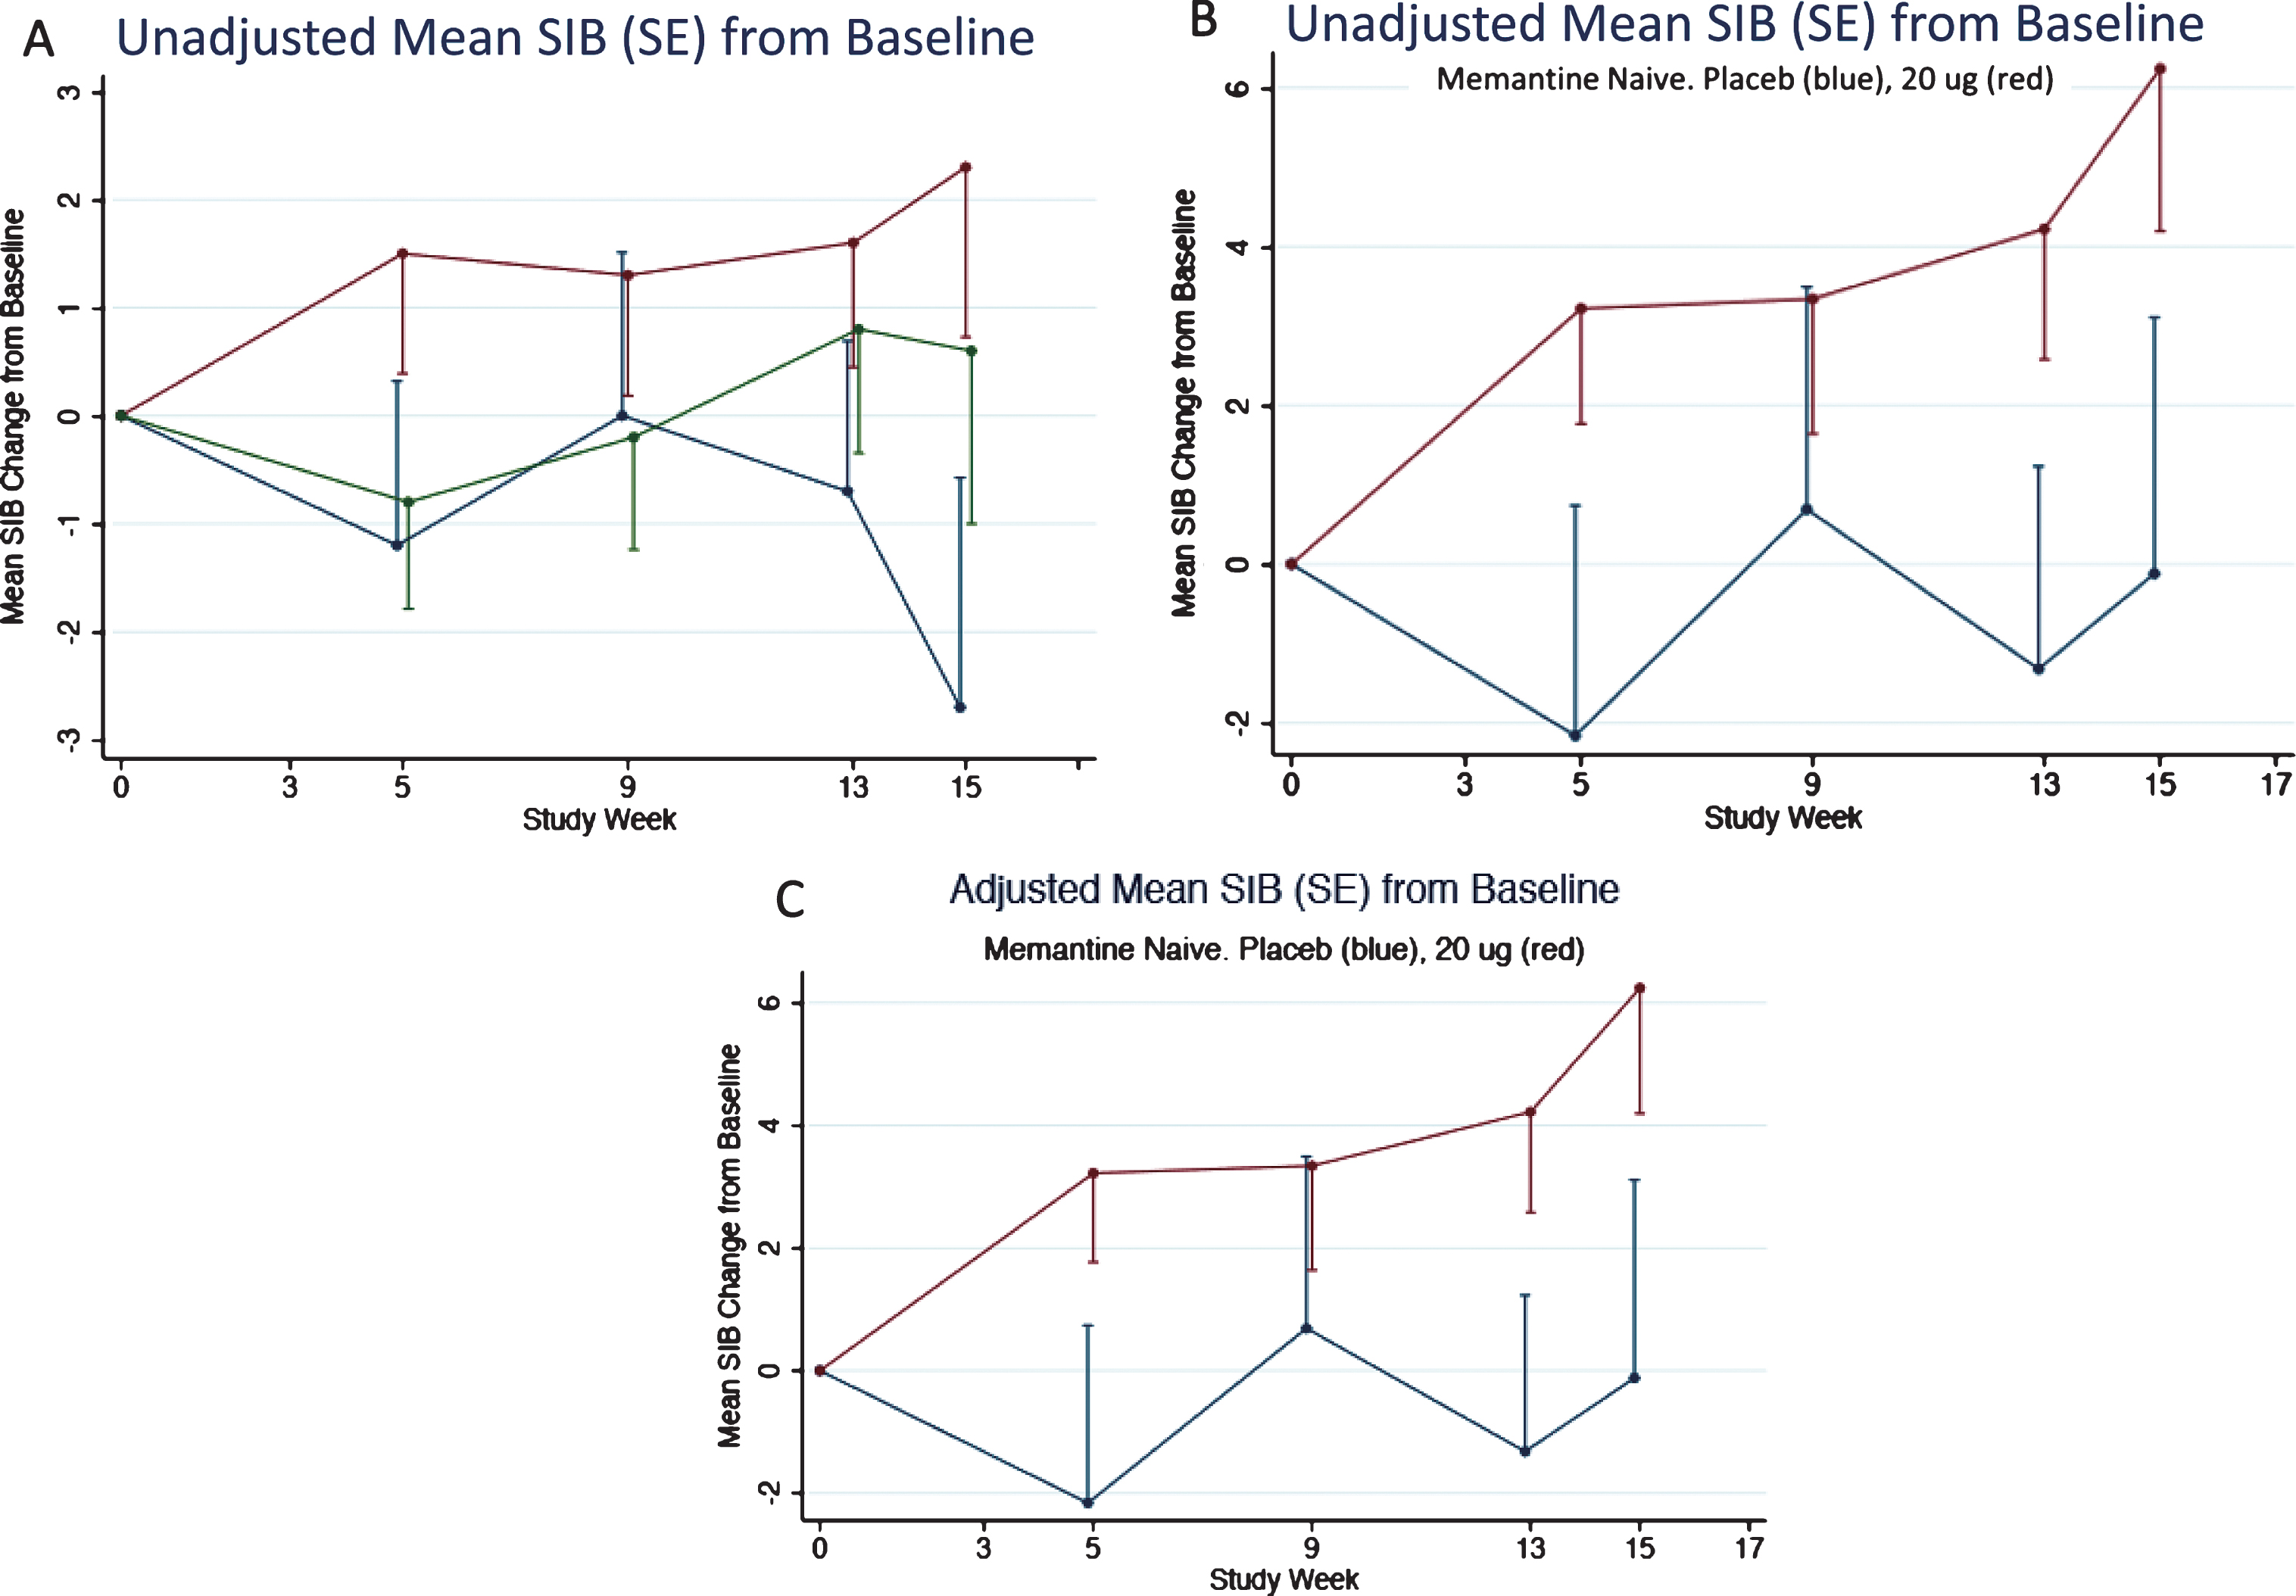 A) Mean SIB changes (unadjusted) from baseline for the FAS subset. 80% confidence intervals are given in Table 3. B) Mean SIB changes (unadjusted) from baseline for the FAS subset for patients not on memantine. C) Mean SIB changes (adjusted) from baseline for the FAS subset for patients not on Memantine. Error Bars = SEM.